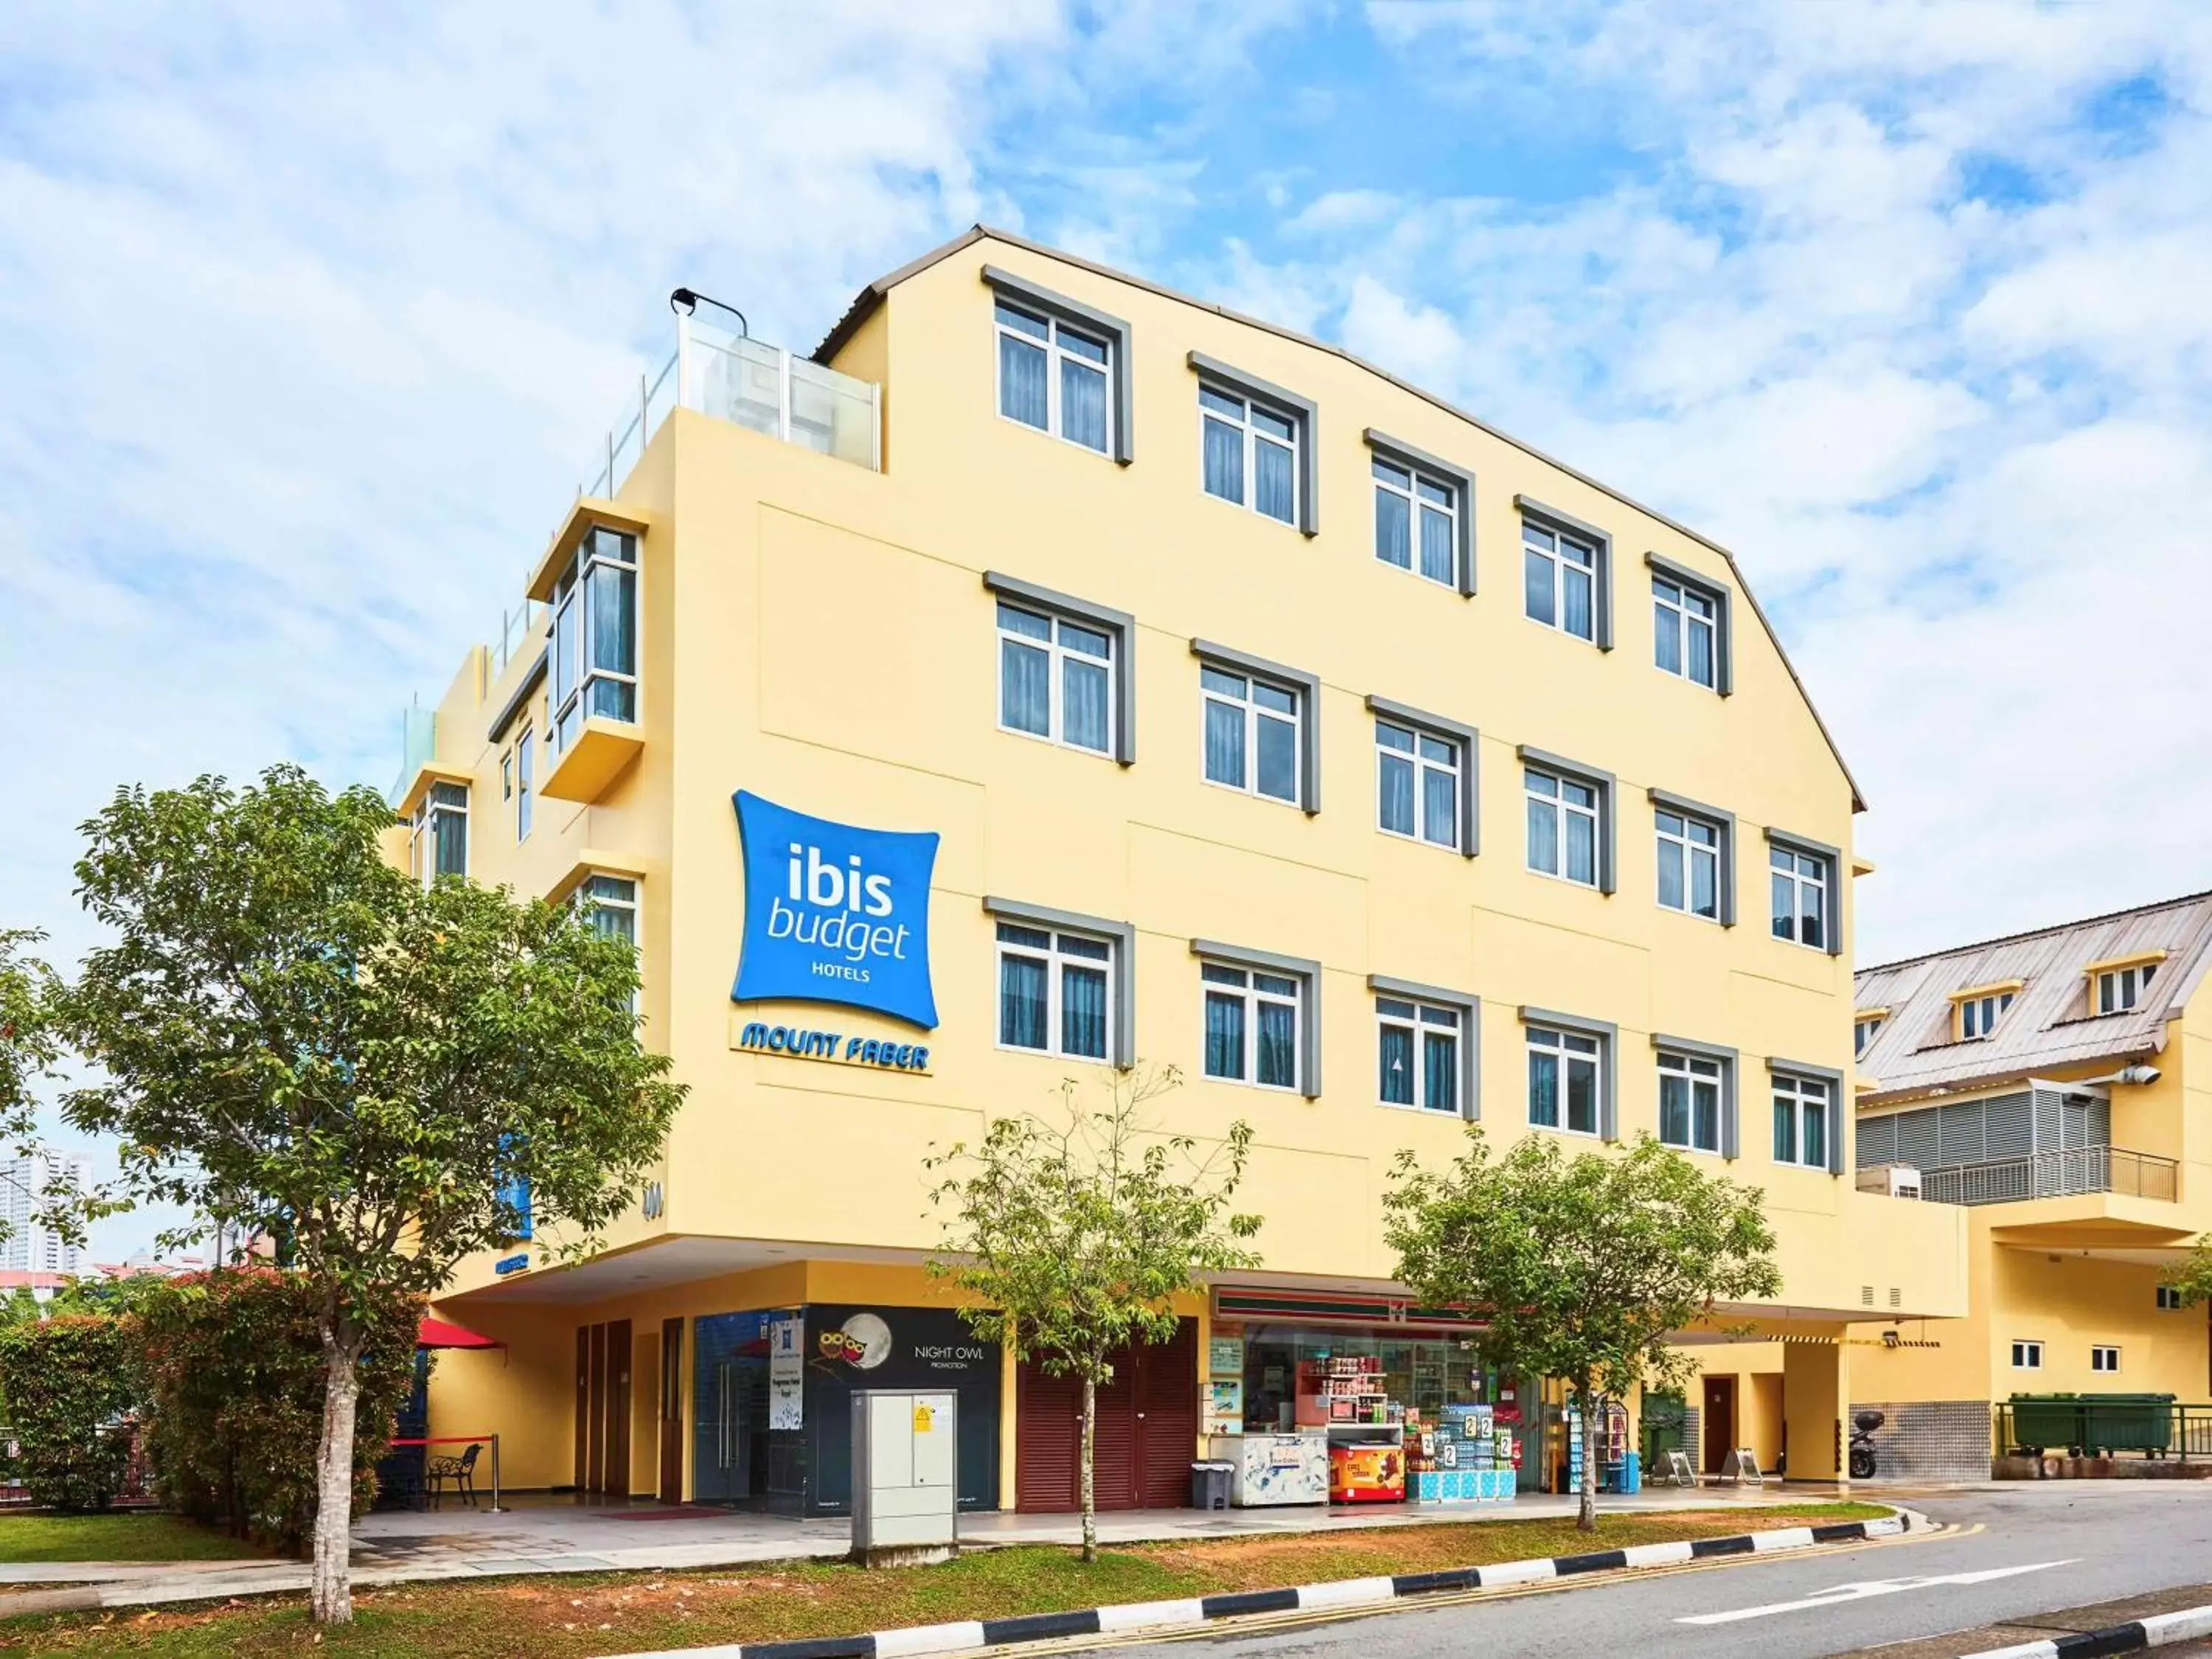 Property Building in ibis budget Singapore Mount Faber